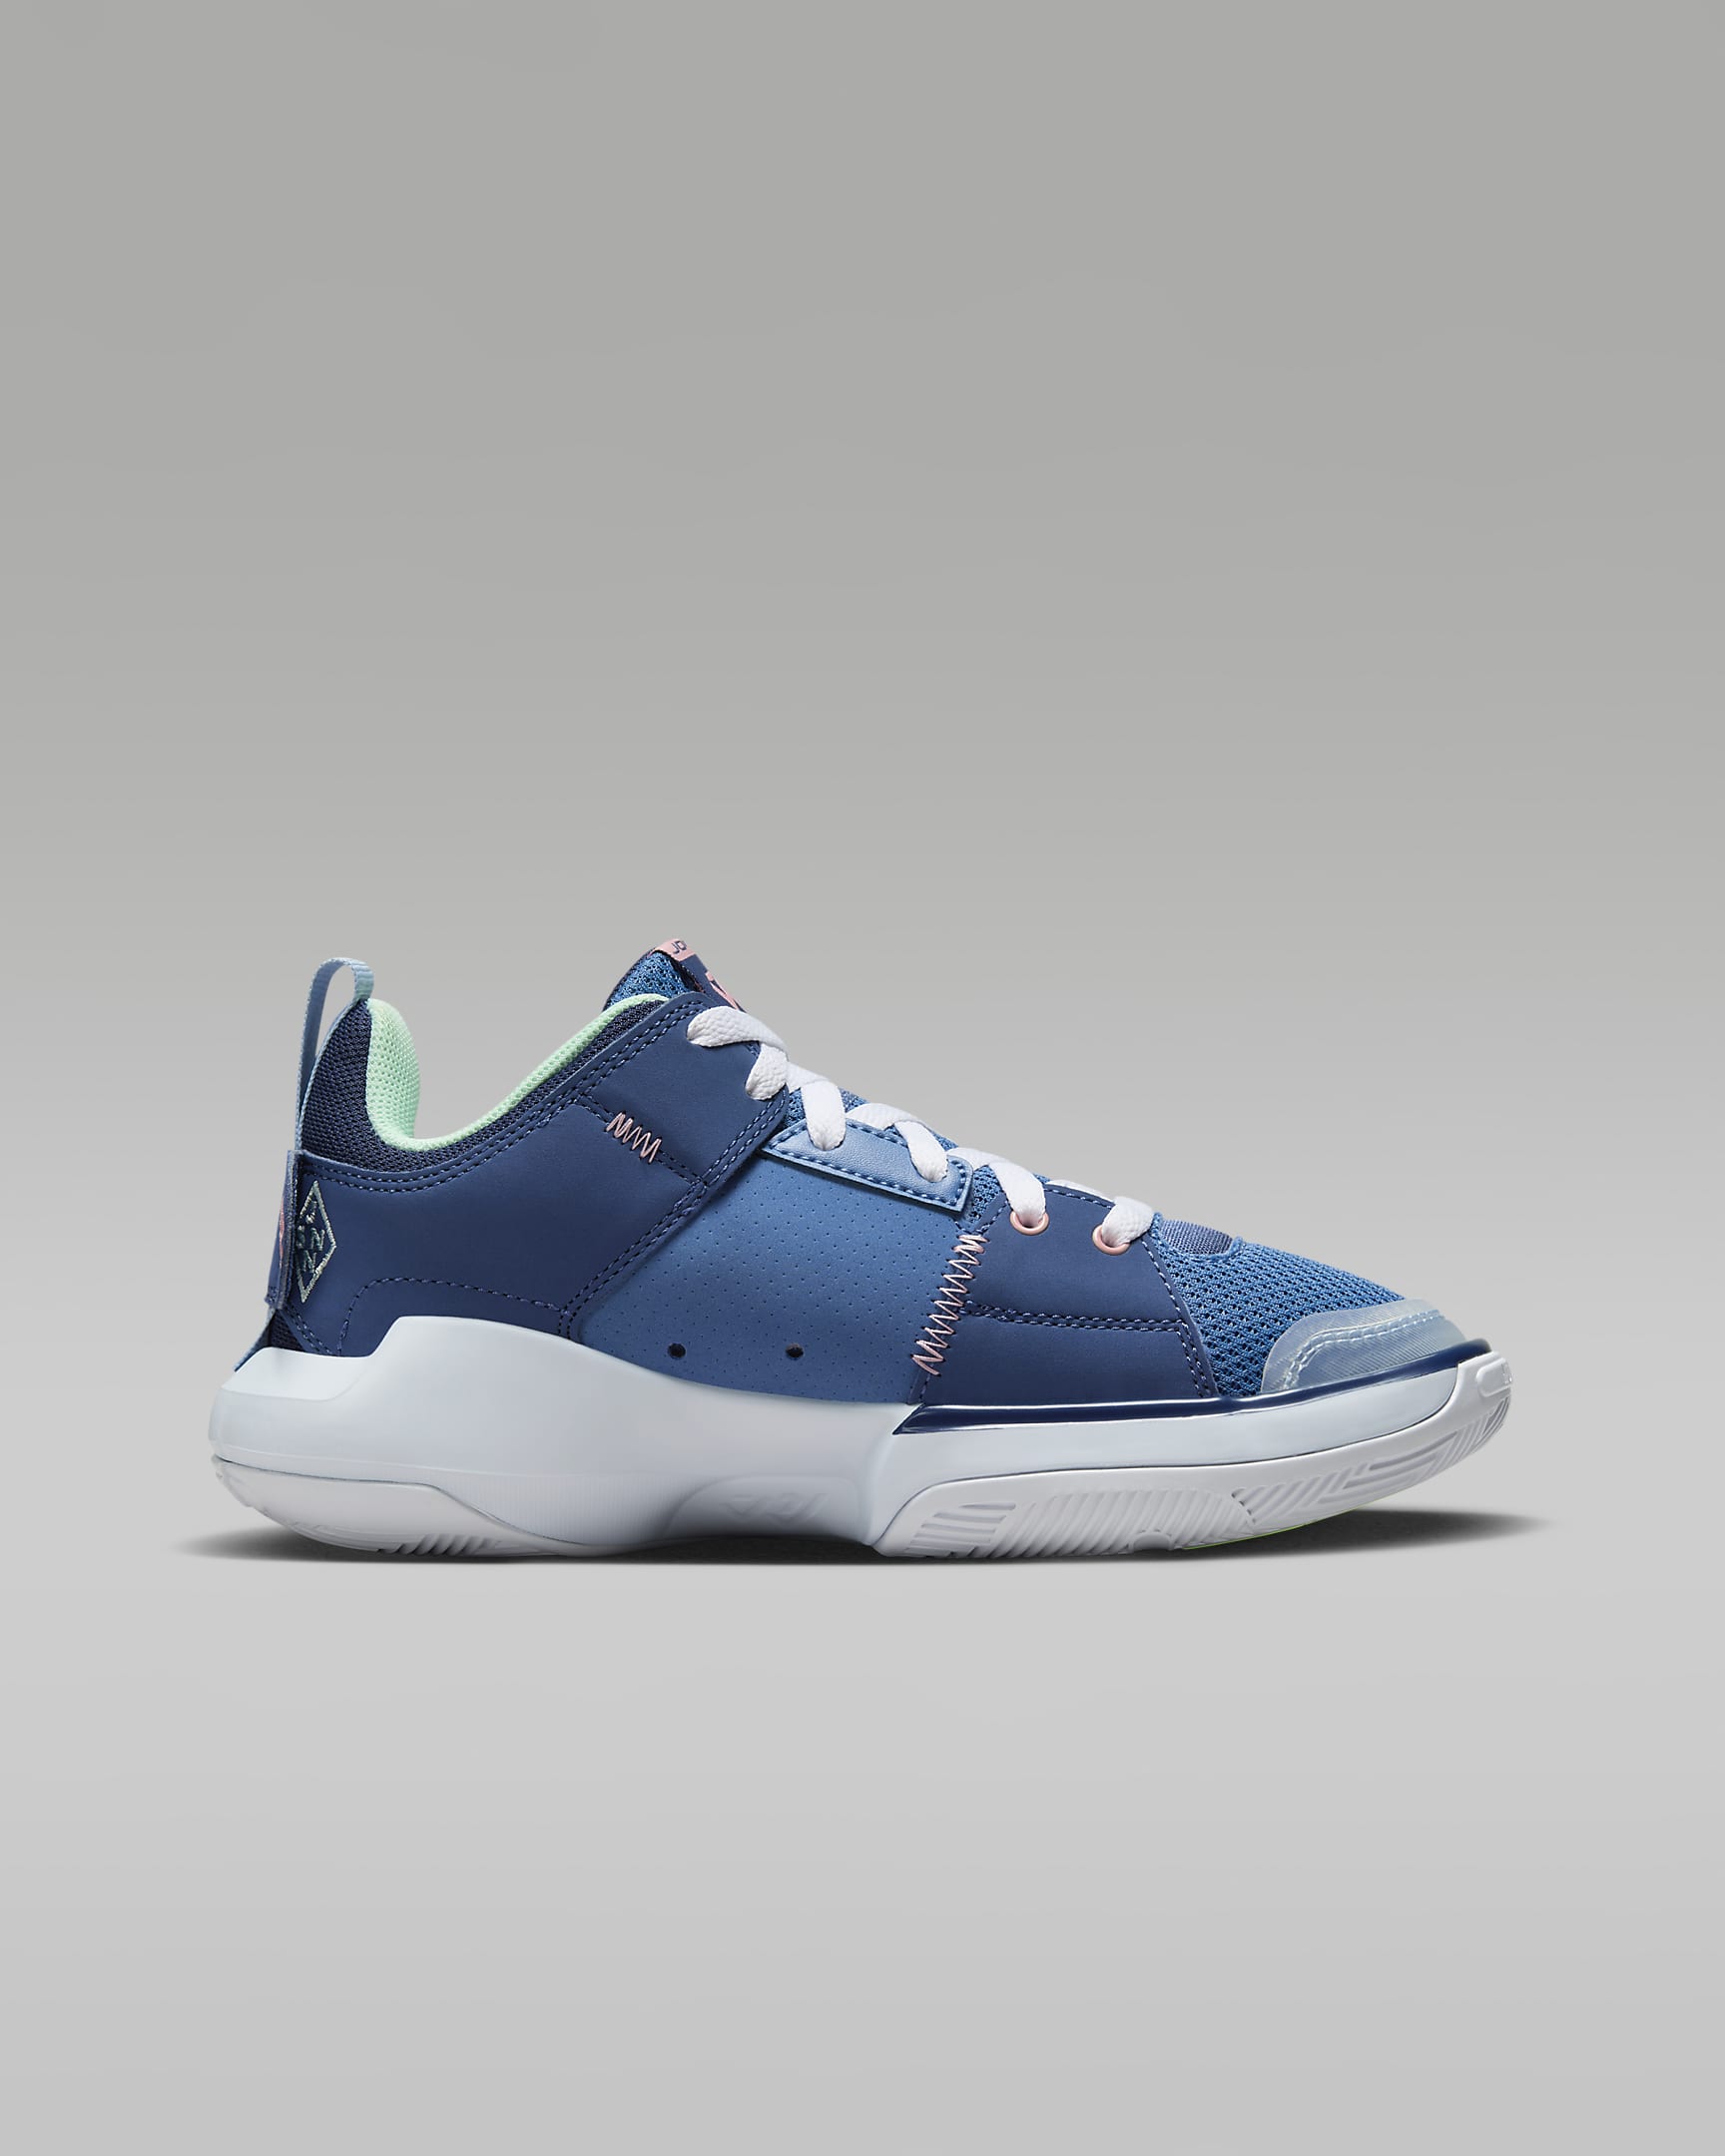 Jordan One Take 5 Older Kids' Shoes - Stone Blue/Mystic Navy/Midnight Navy/Bleached Coral